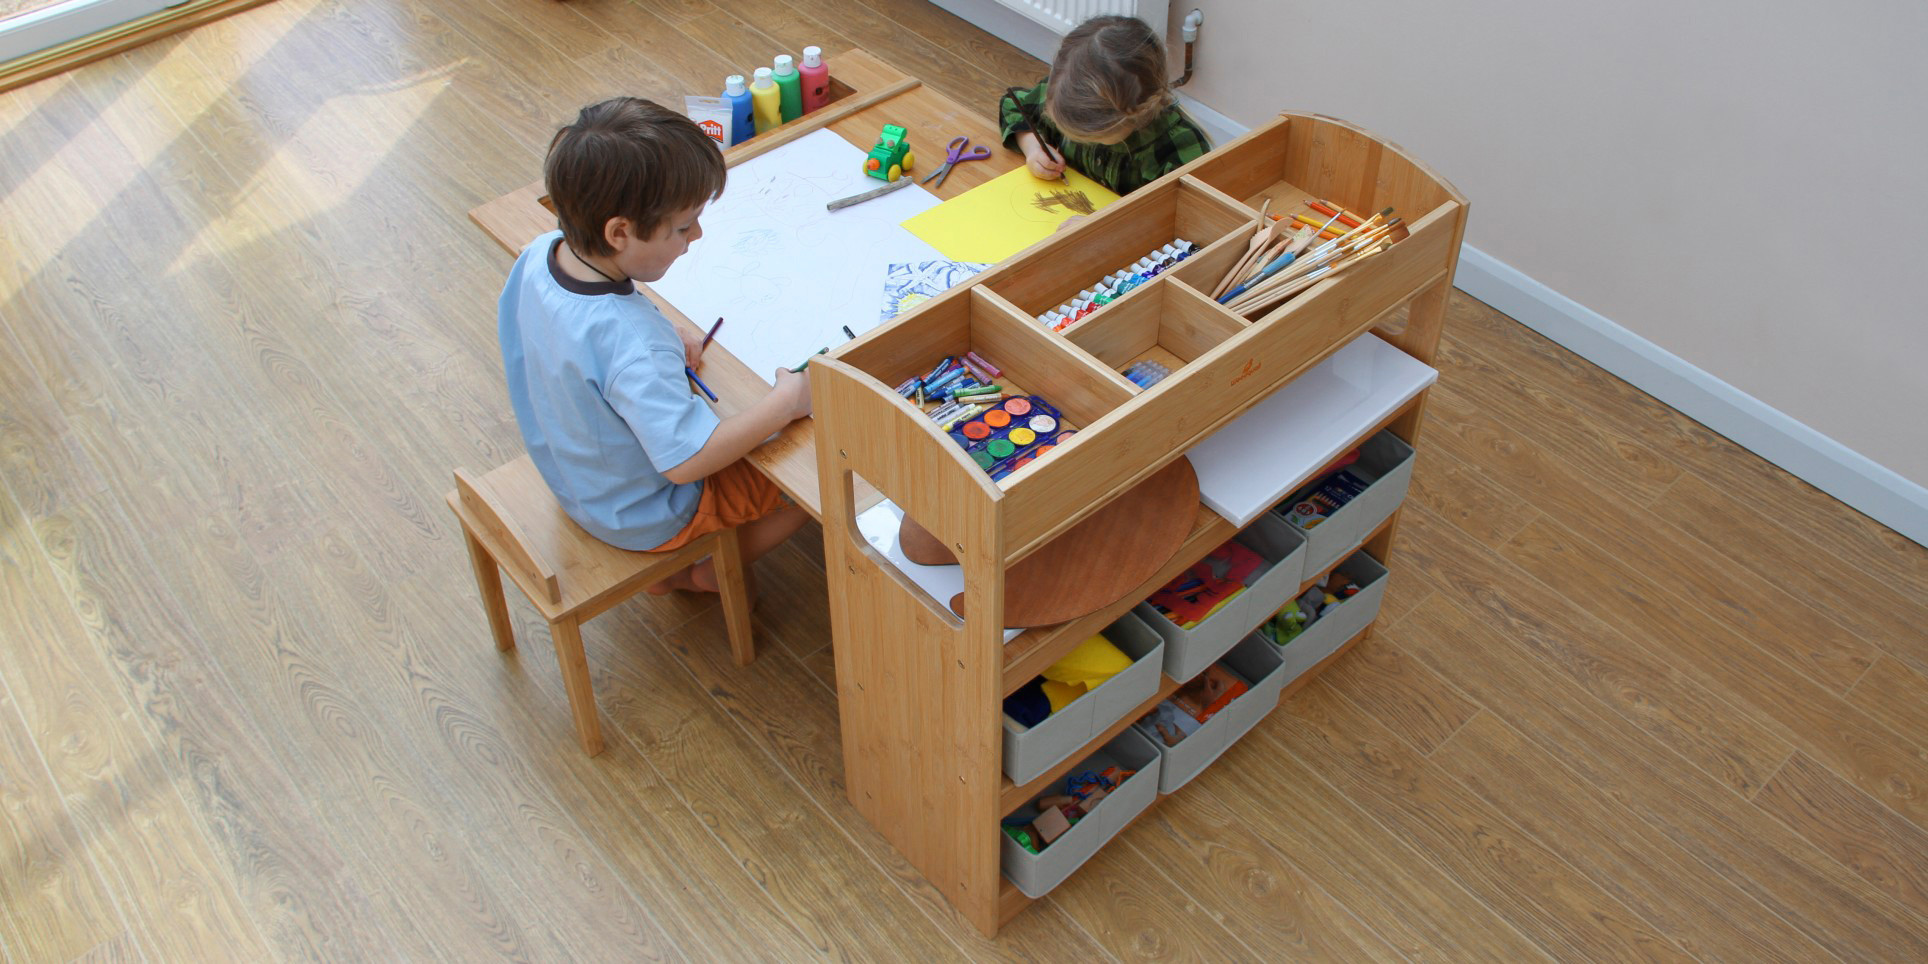 Kids Craft Table And Chairs
 Children s Arts and Crafts Table and Chairs